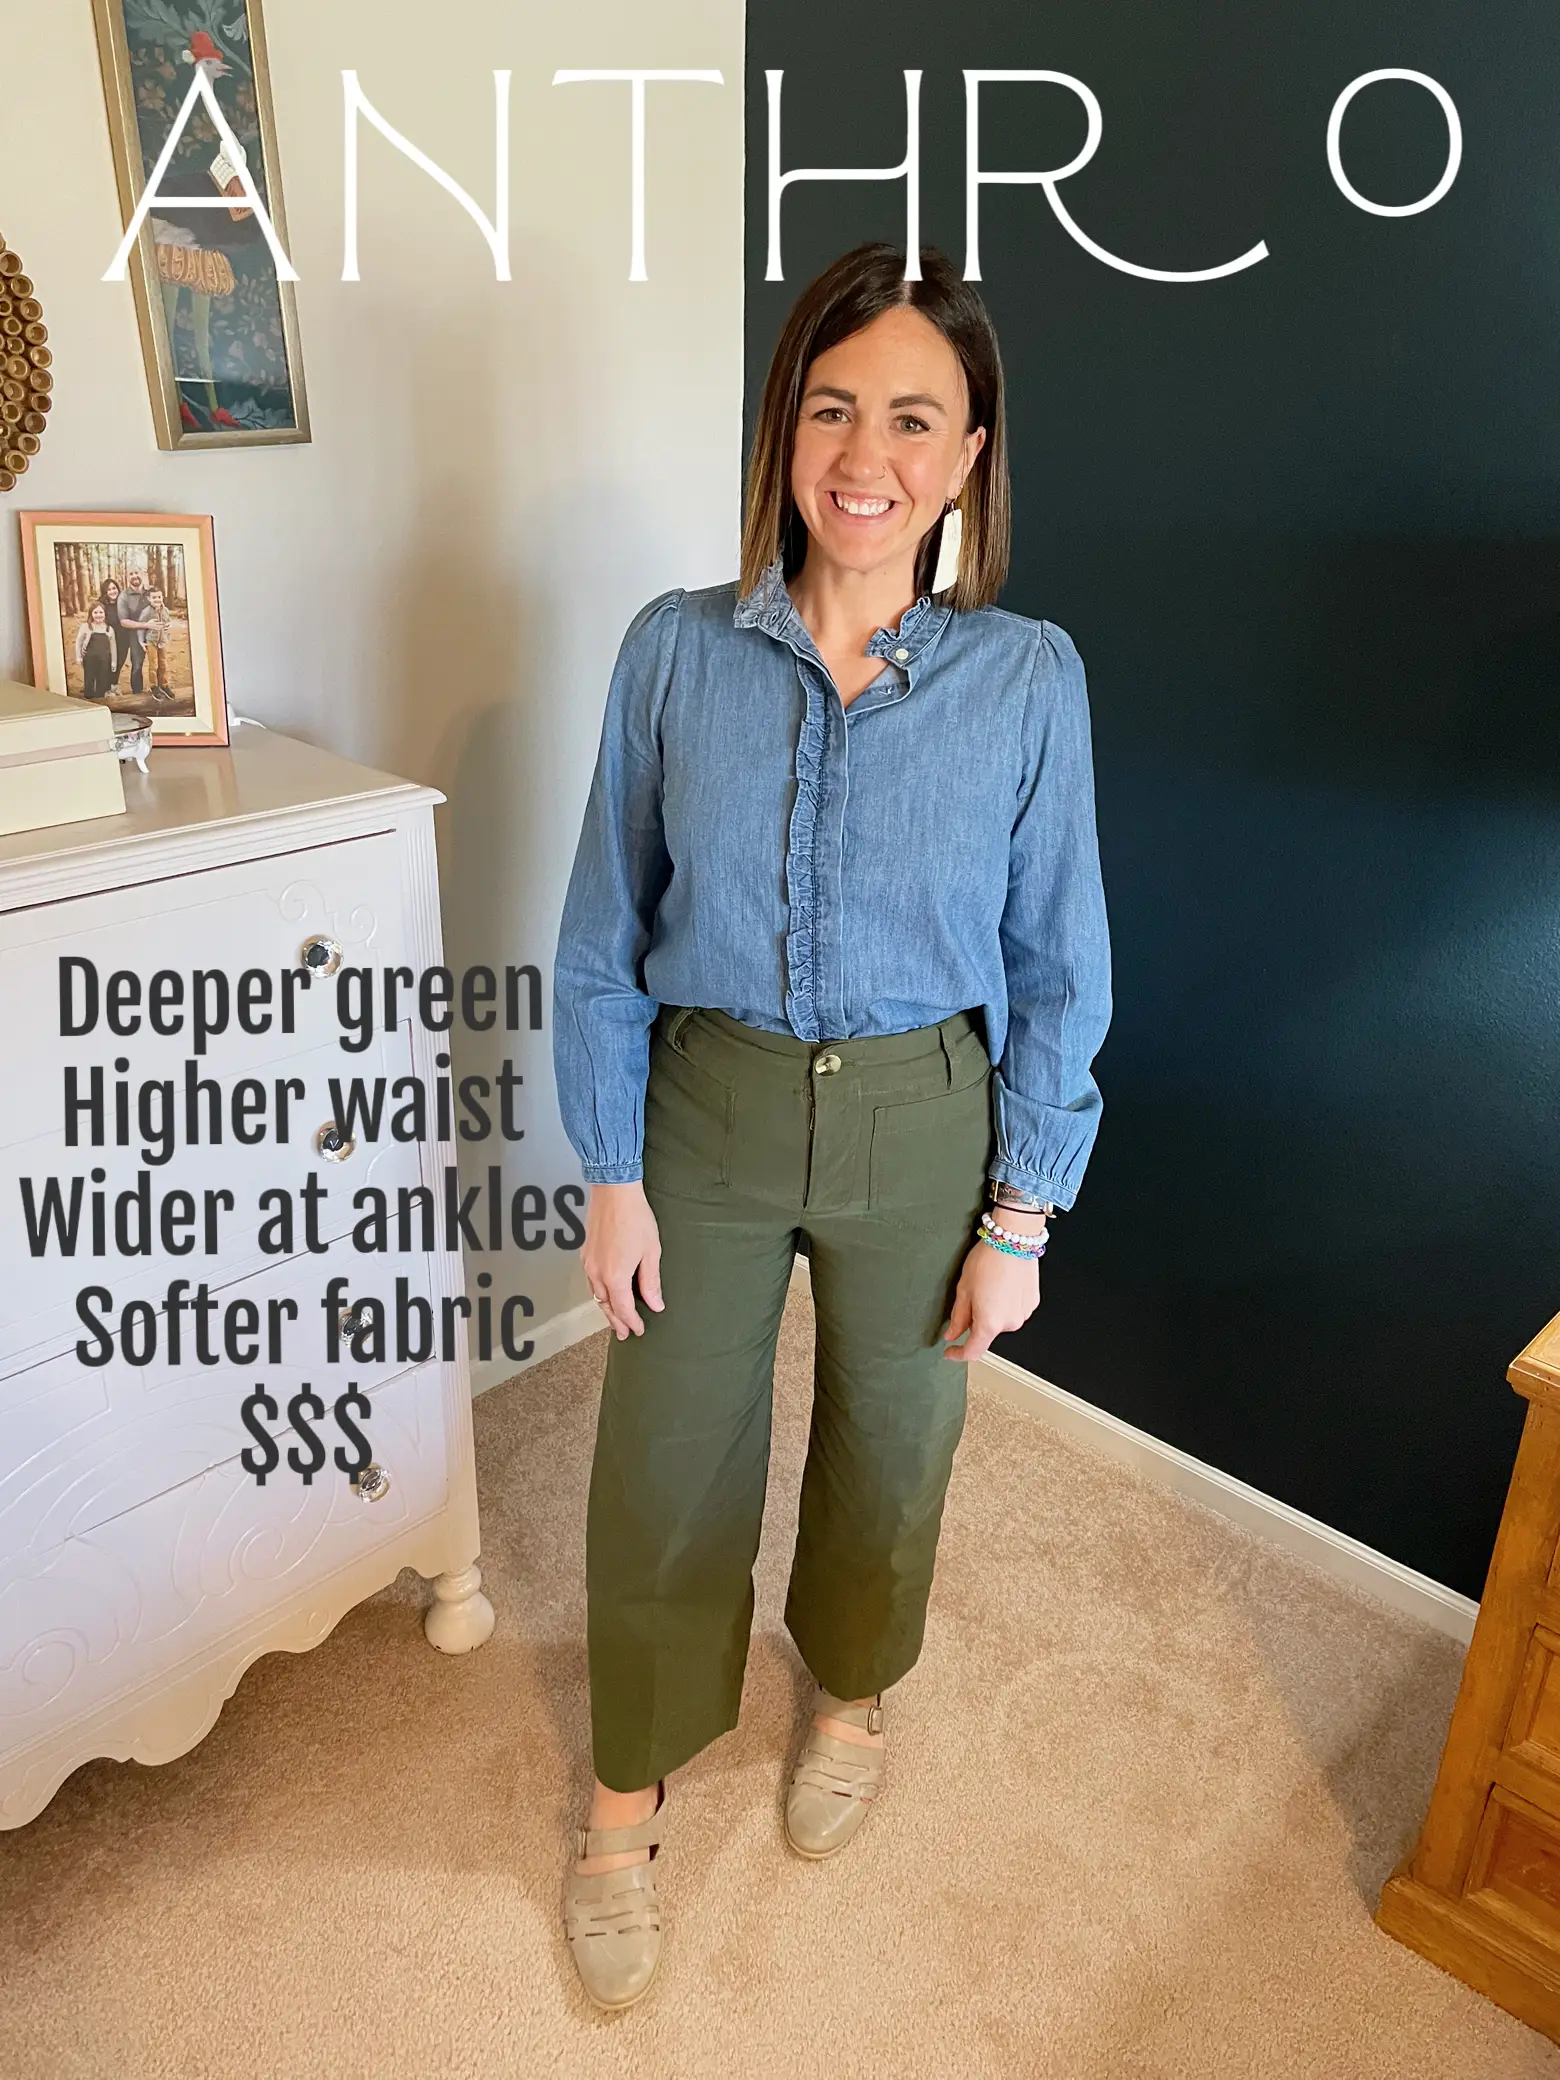 Anthropologie vs. Old Navy Wide Leg Pants, Gallery posted by Rose Hodgson